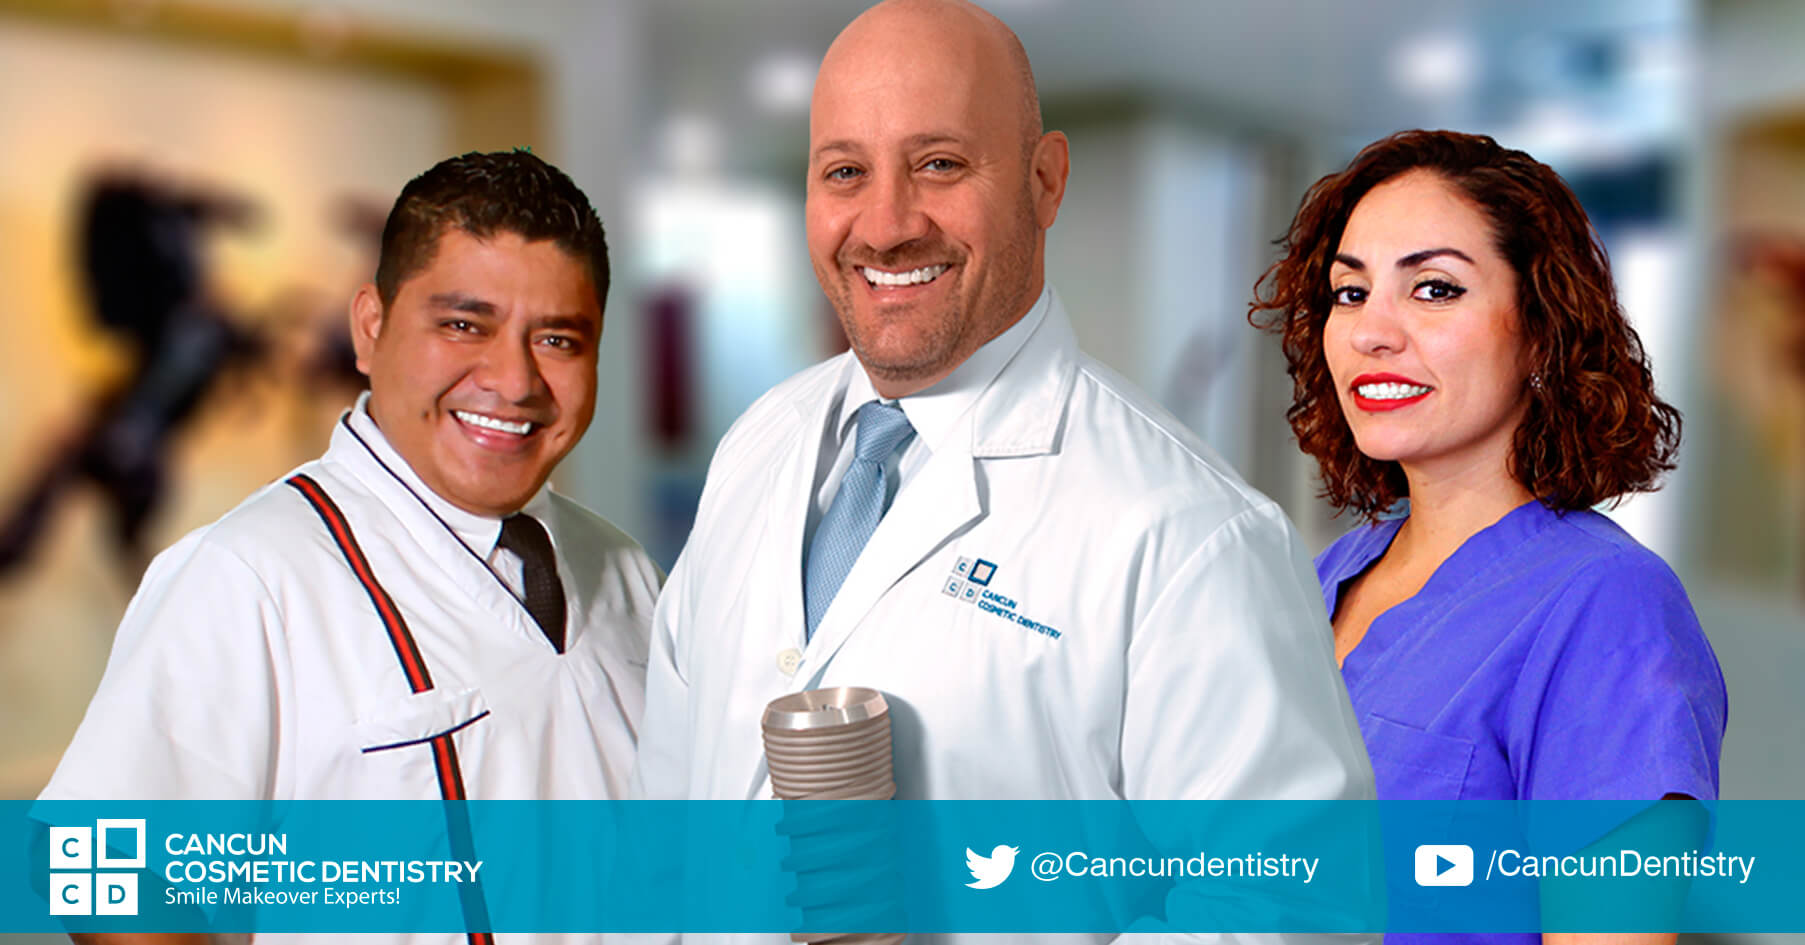 What can you expect on your dental implant treatment in Cancun?